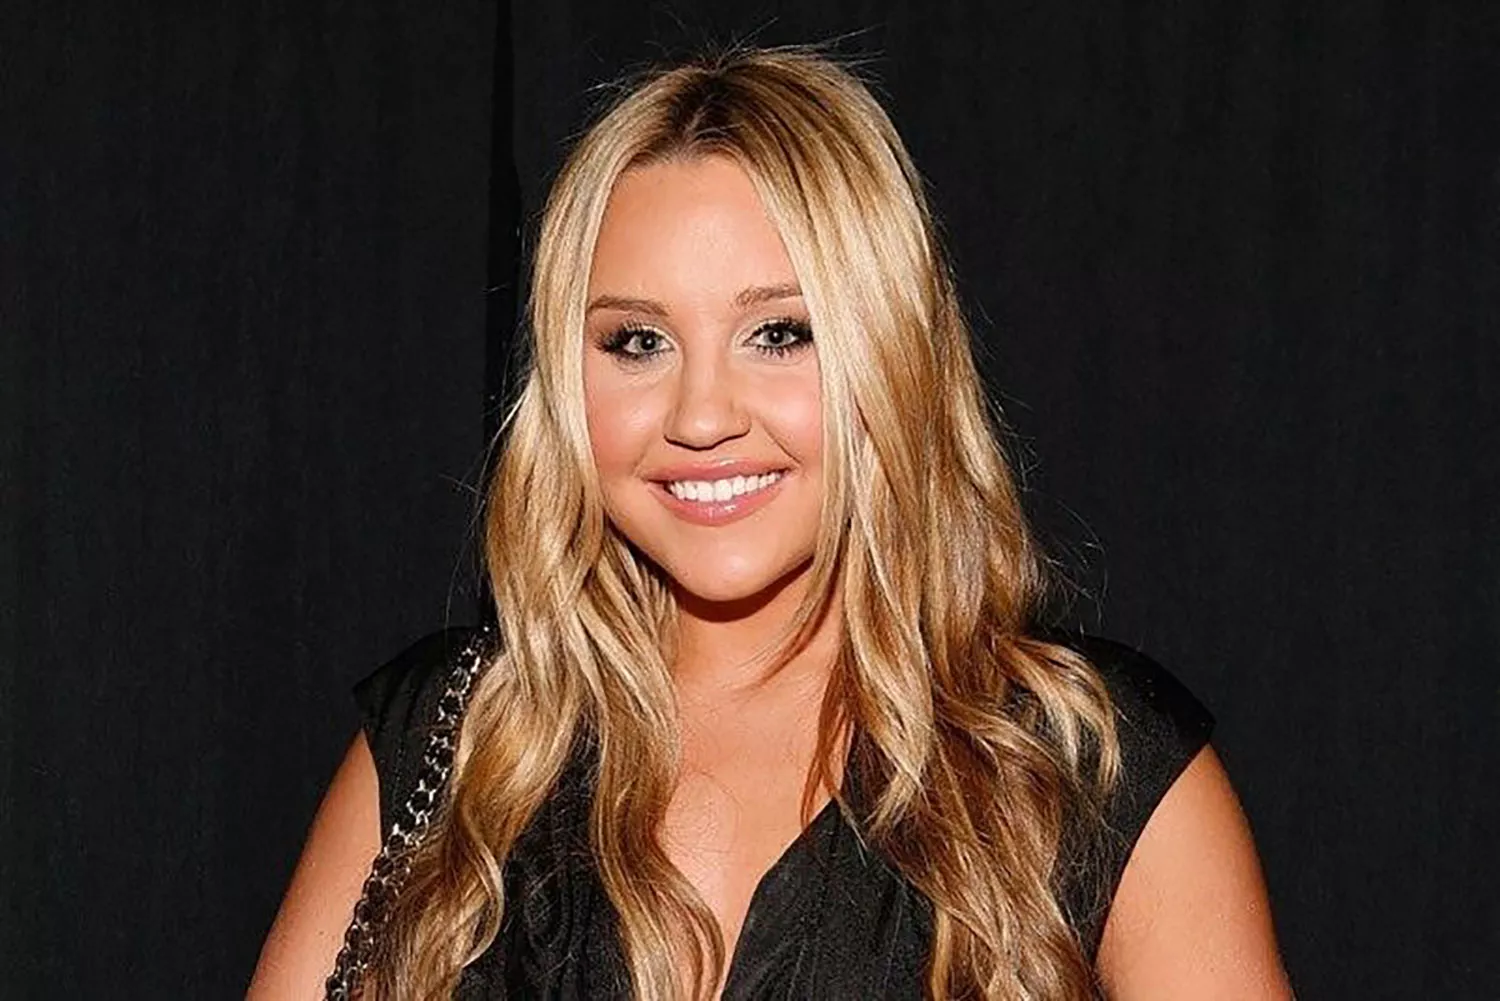 Amanda Bynes Reportedly Roamed Around On The Streets For Days Before Being Put On Psychiatric